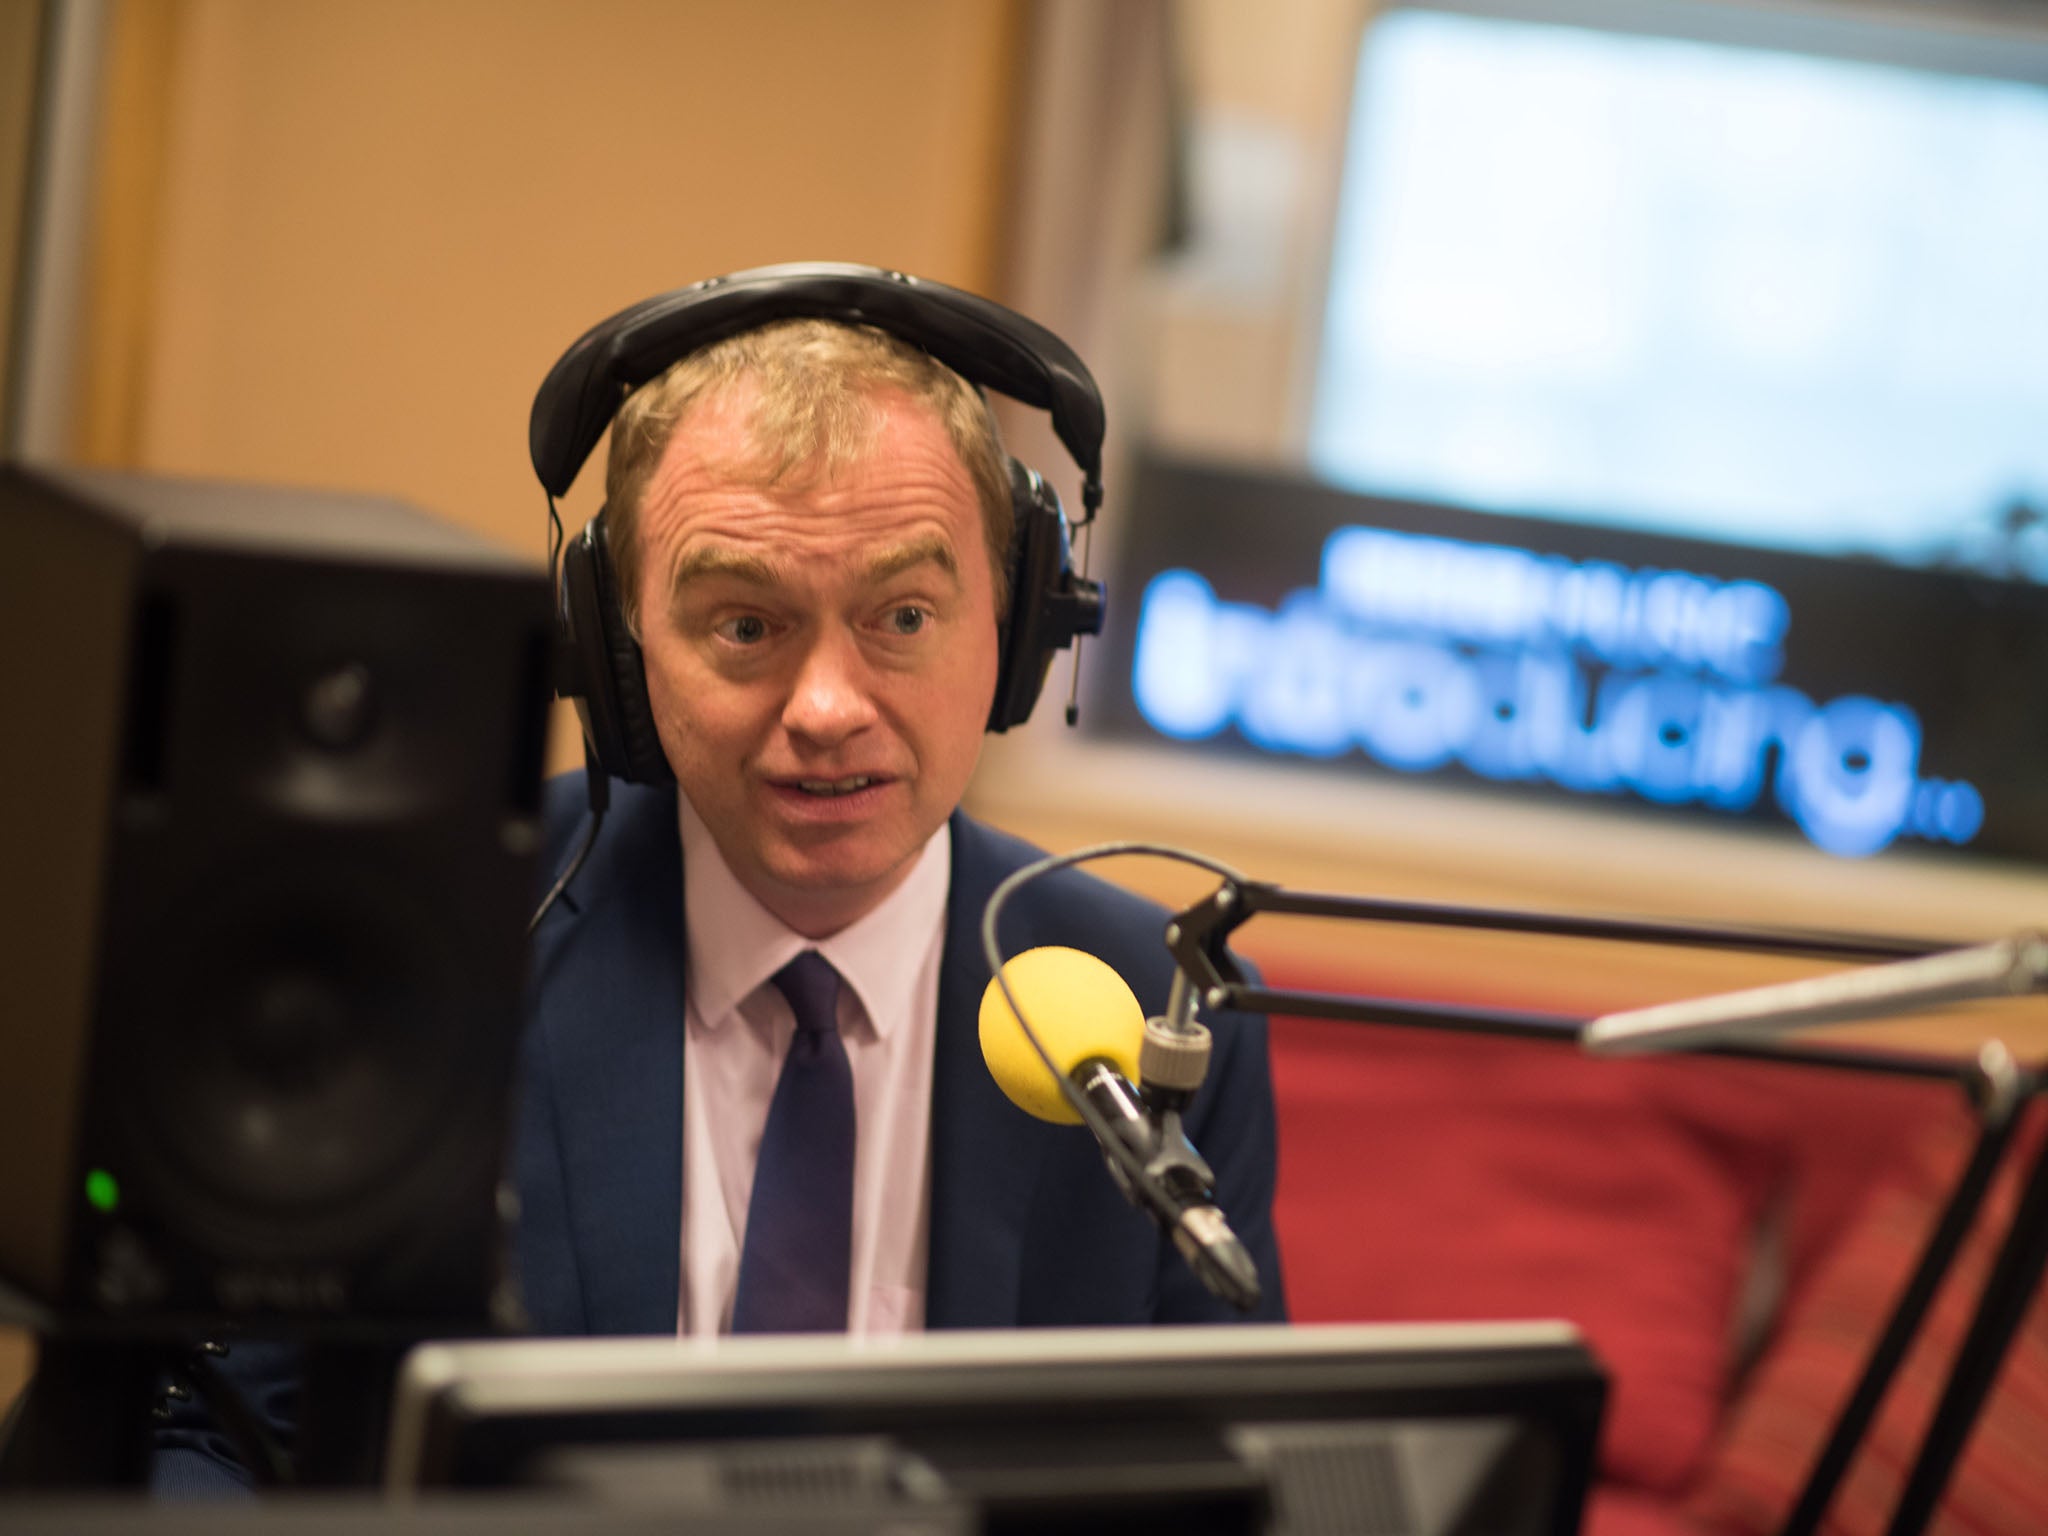 Tim Farron was asked three times today if he thought gay sex was a sin